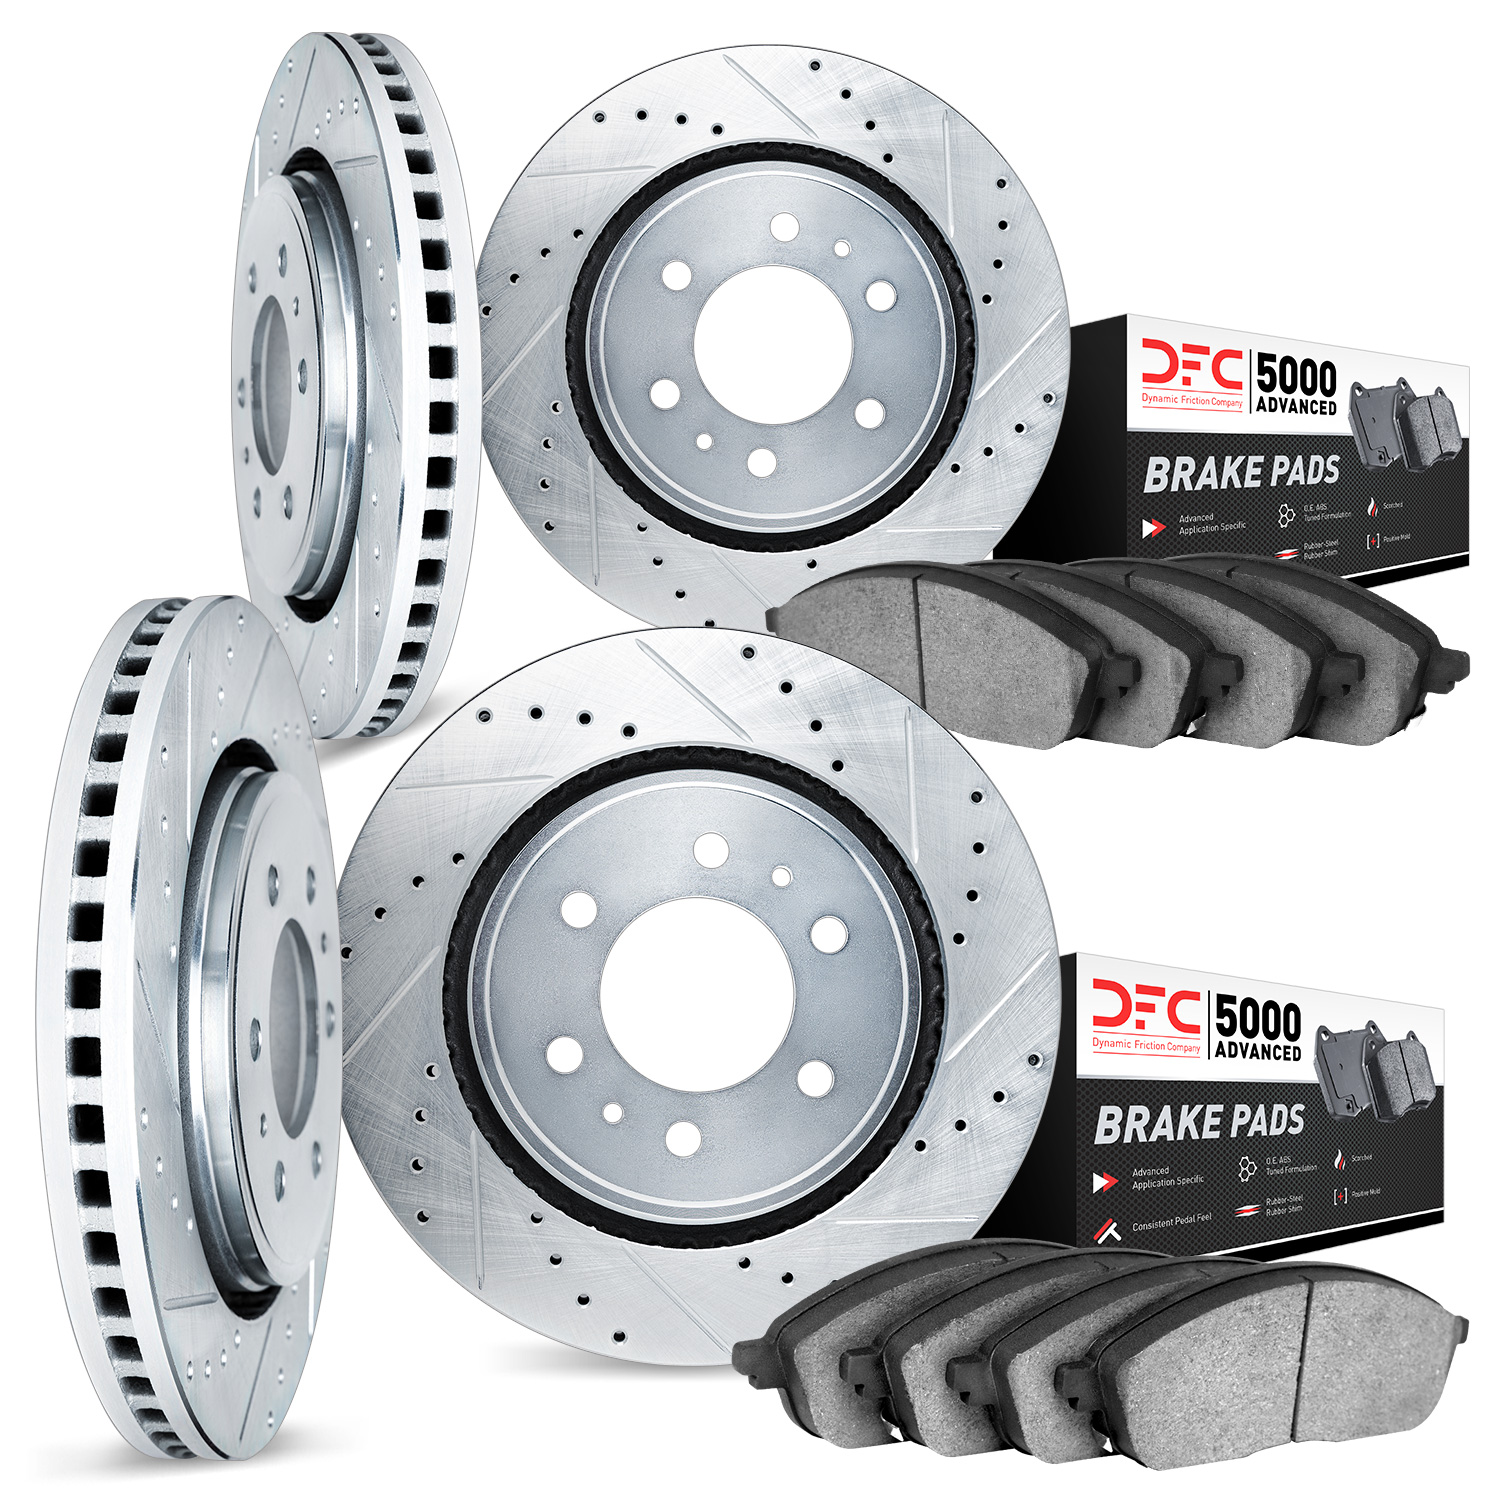 7504-54373 Drilled/Slotted Brake Rotors w/5000 Advanced Brake Pads Kit [Silver], 2015-2017 Ford/Lincoln/Mercury/Mazda, Position: